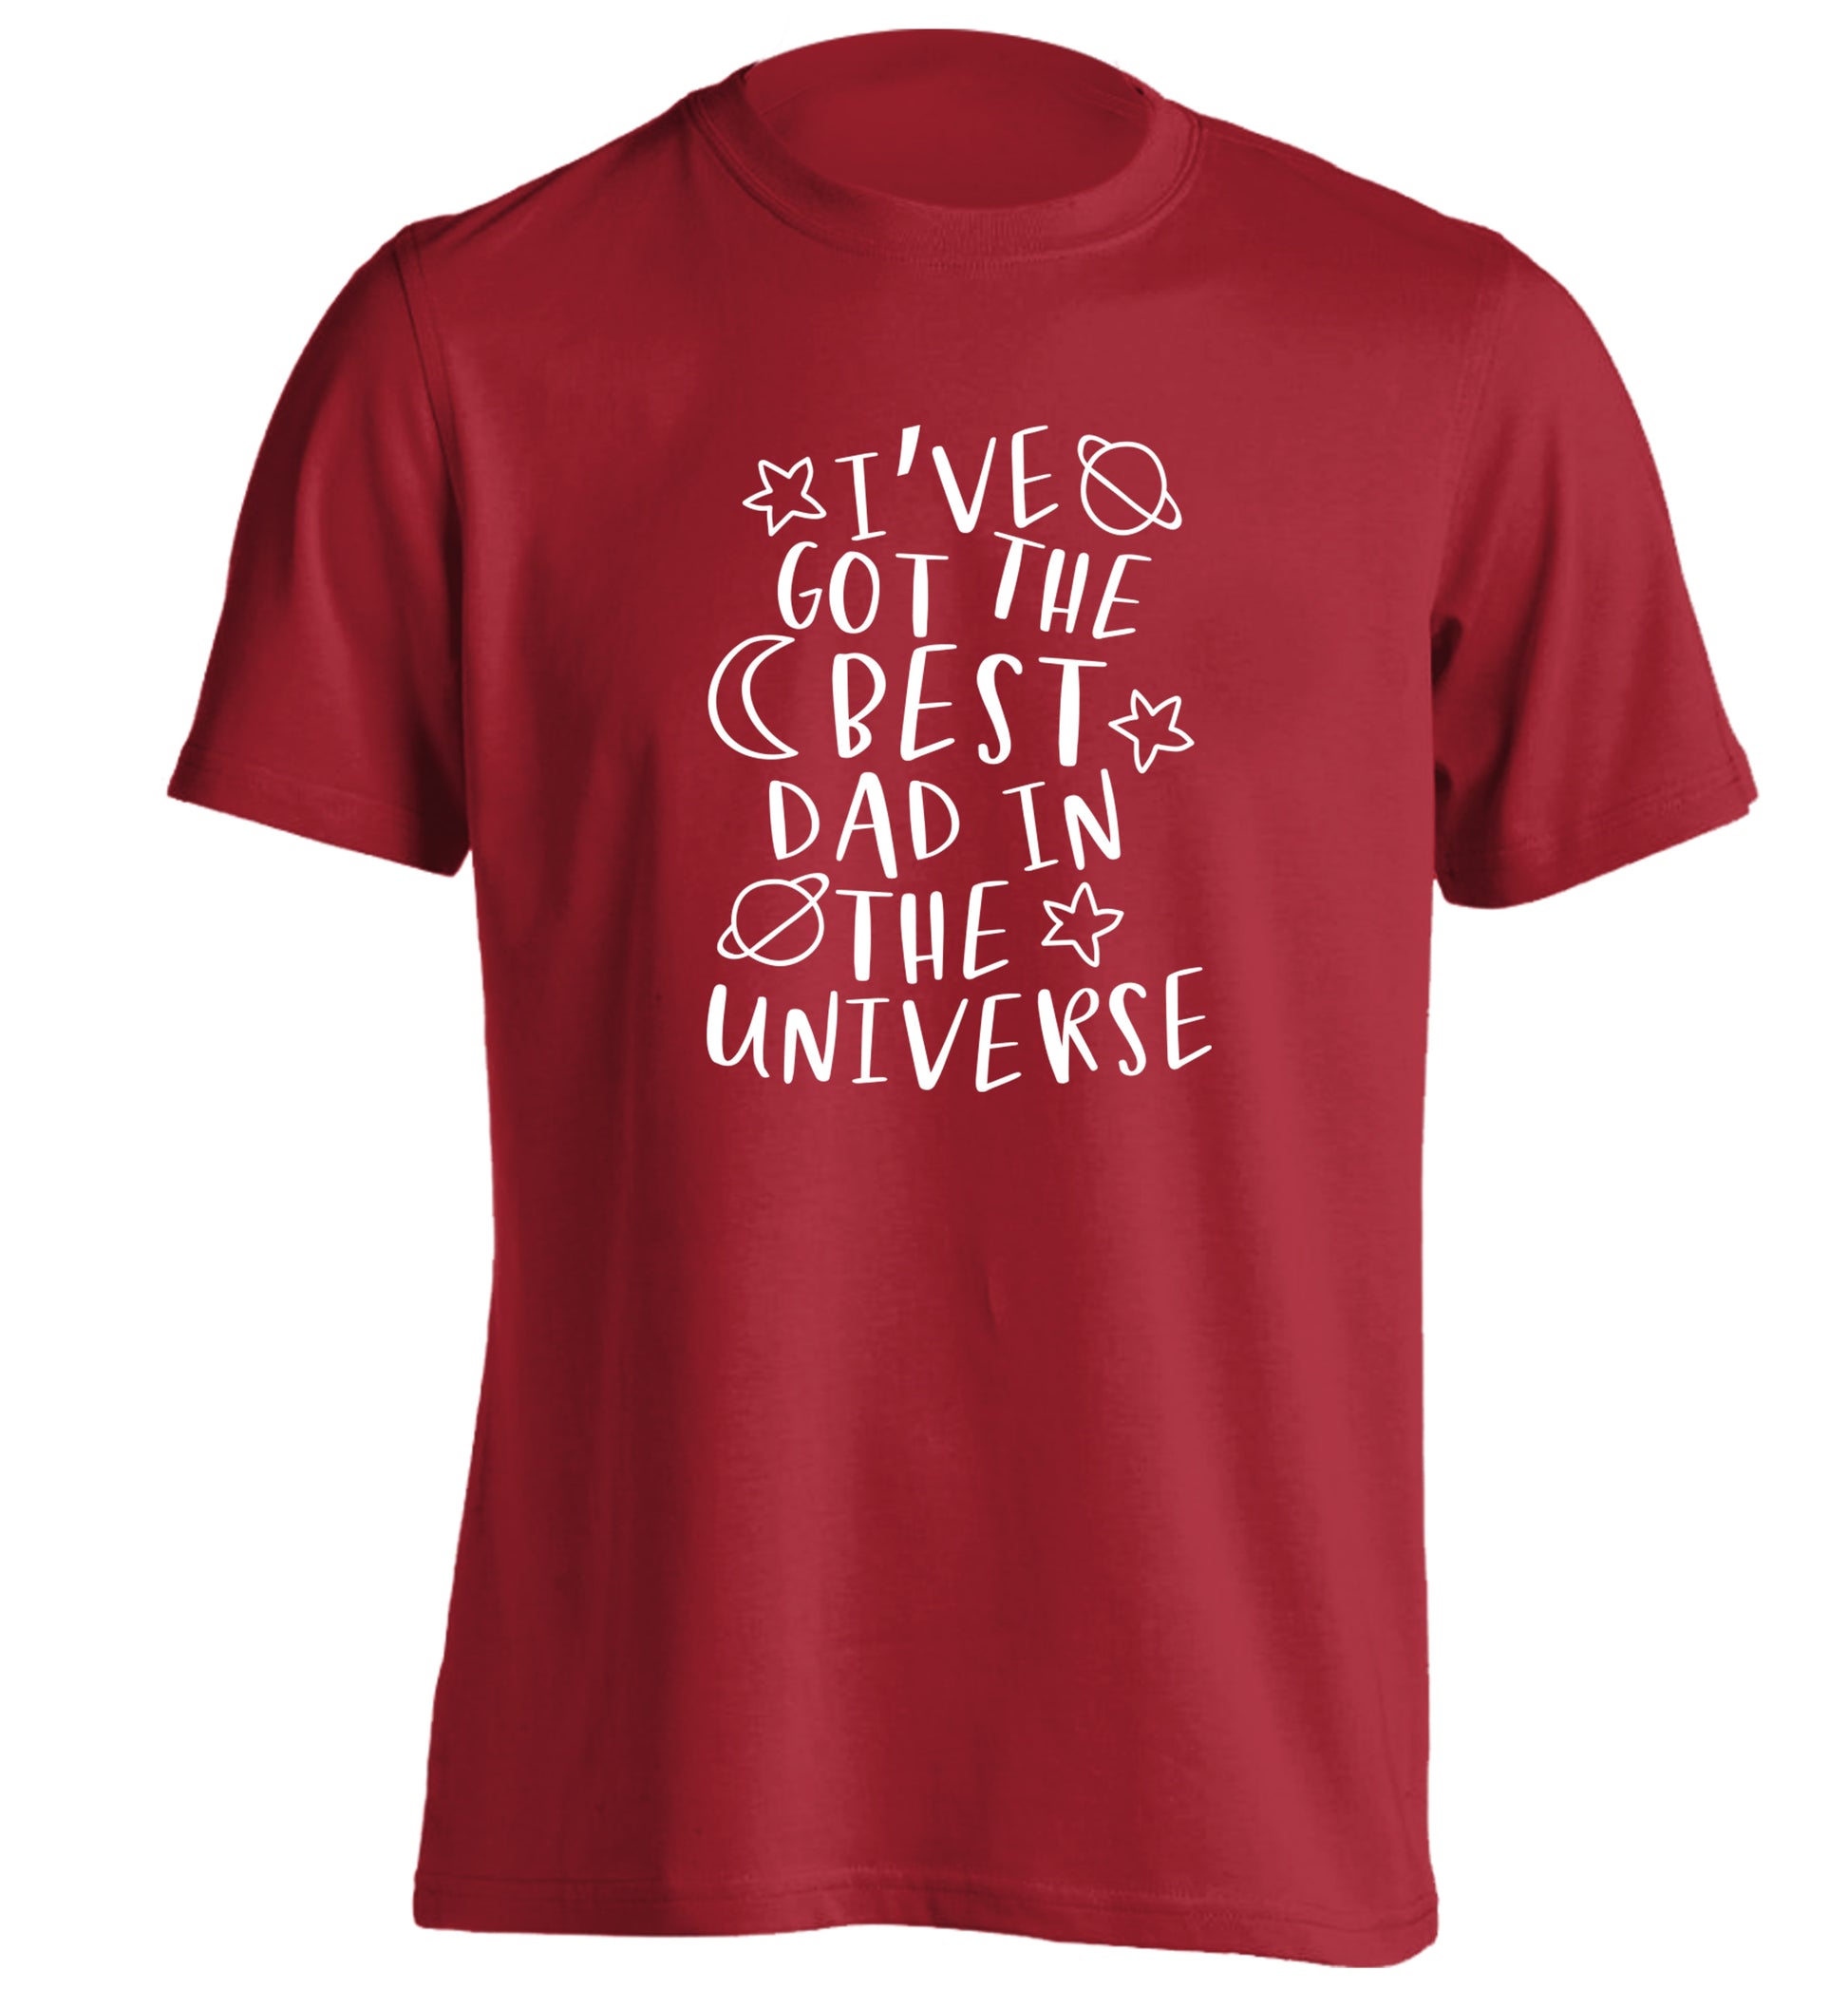 I've got the best dad in the universe adults unisex red Tshirt 2XL